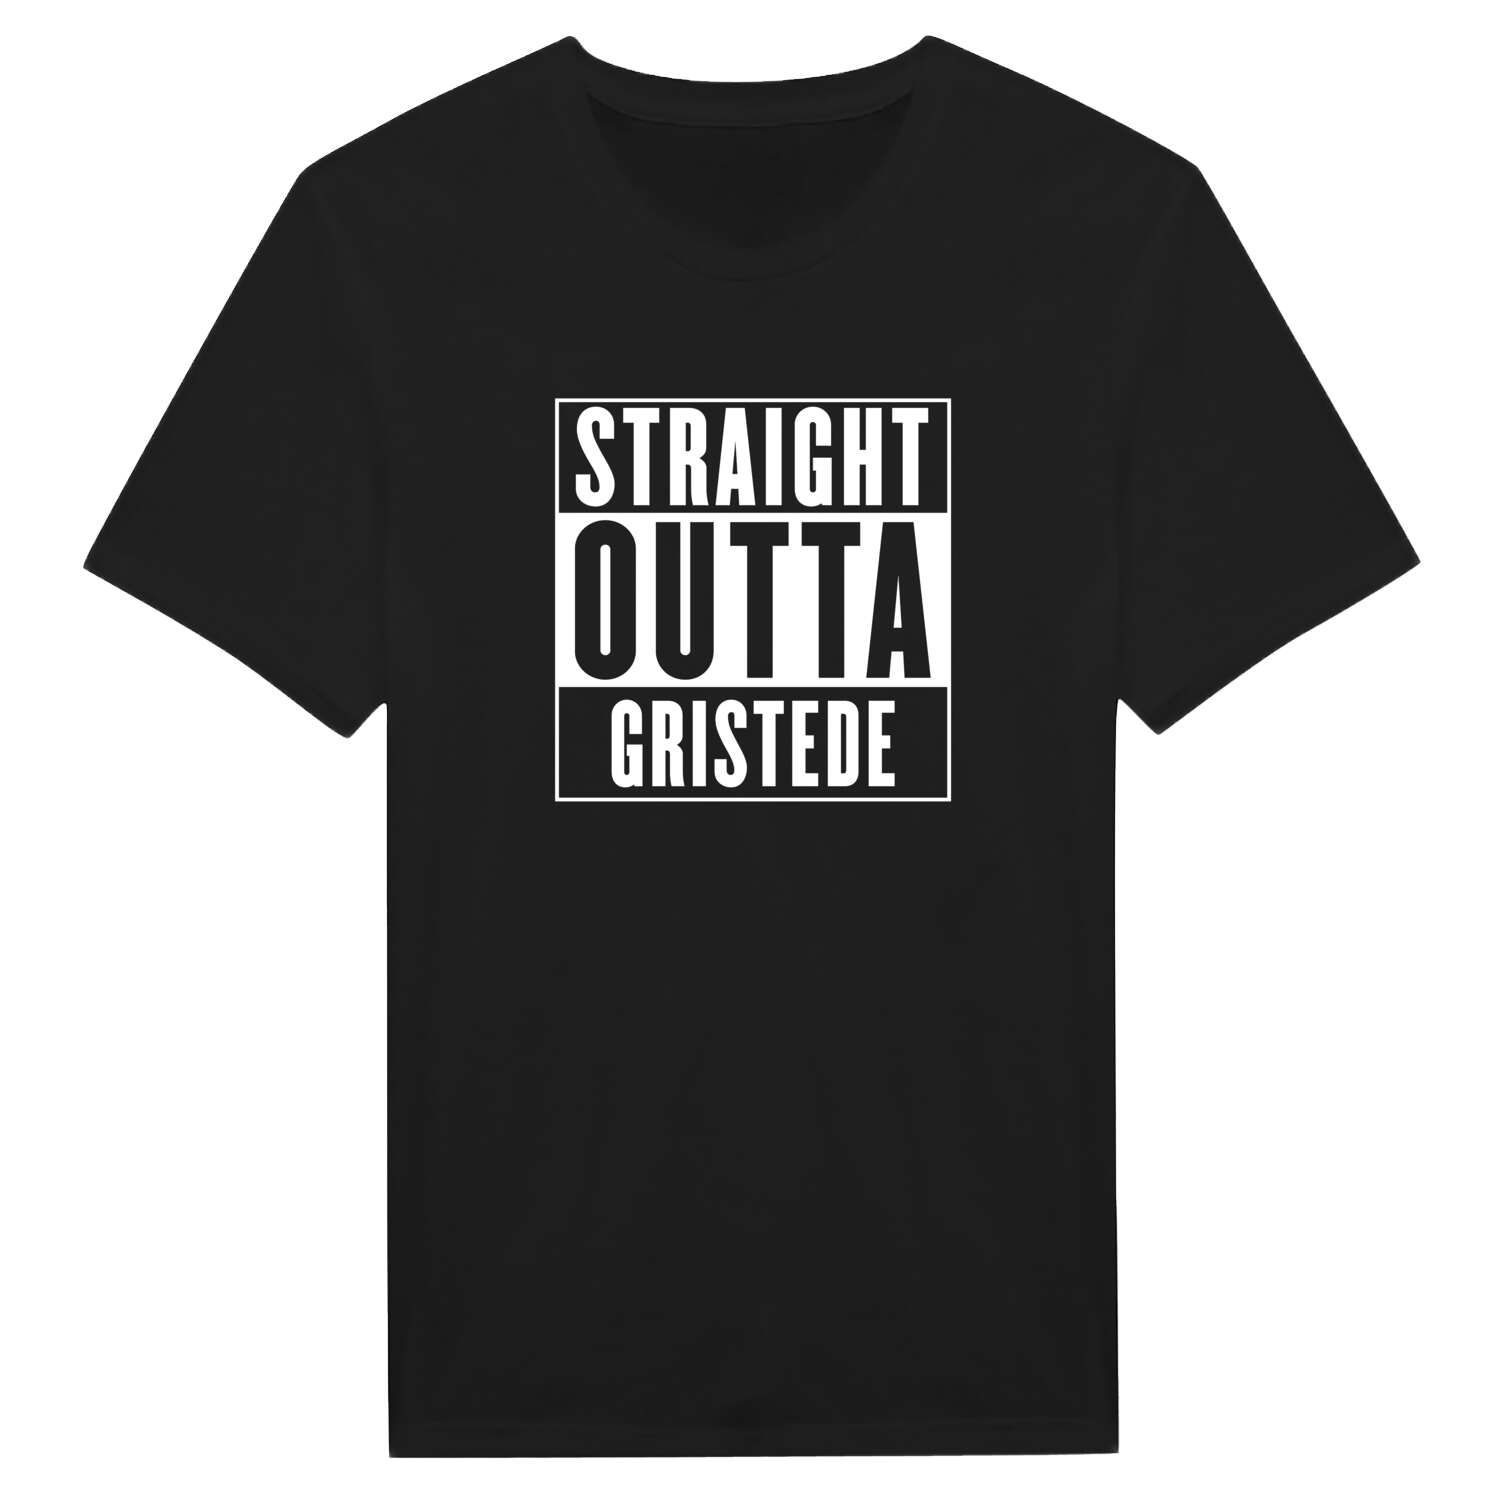 Gristede T-Shirt »Straight Outta«